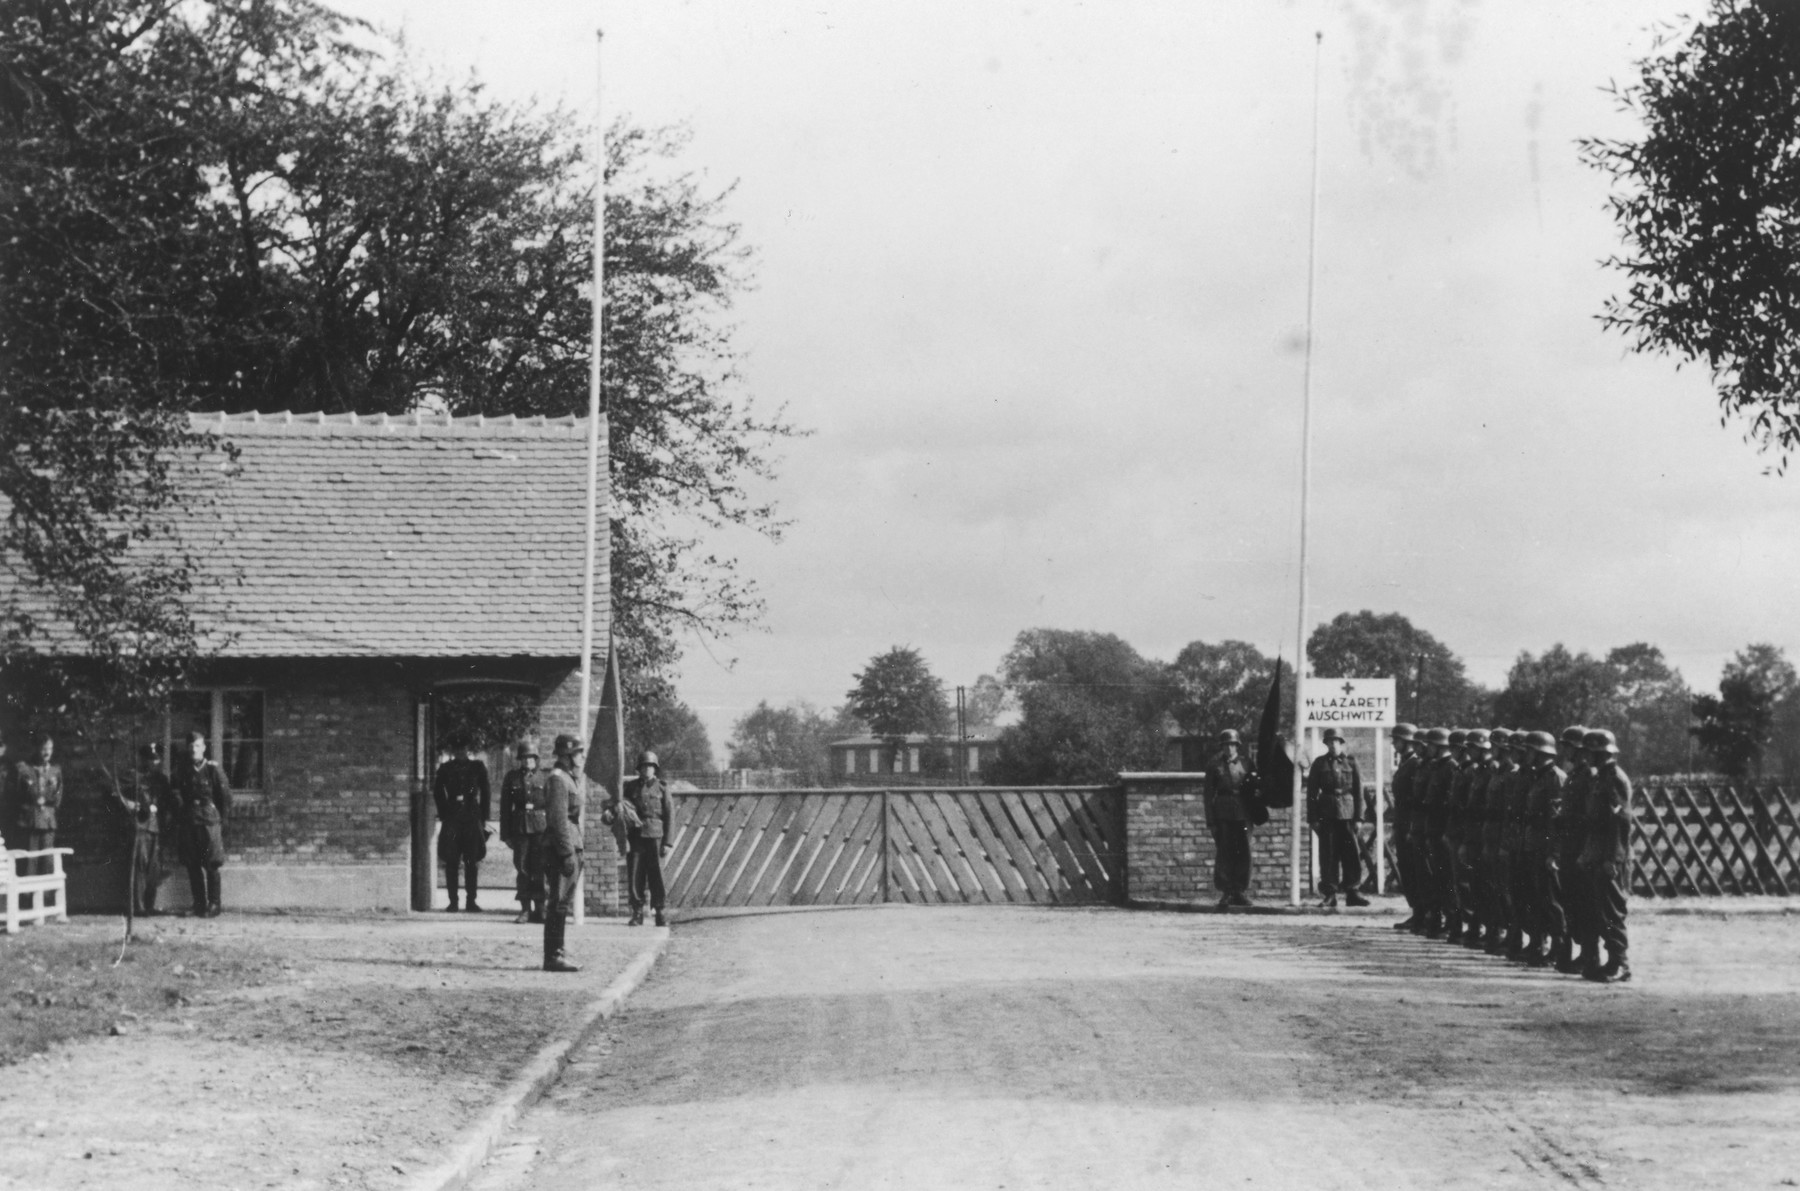 Nazi troops stand at attention during the dedication of the new SS hospital in Auschwitz.  

The official caption reads "Einweihung des SS-Lazarettes in Auschwitz" (Dedication of the SS Hospital in Auschwitz).

Pictured is the entrance to the SS hospital with gate, gate house and flag posts.